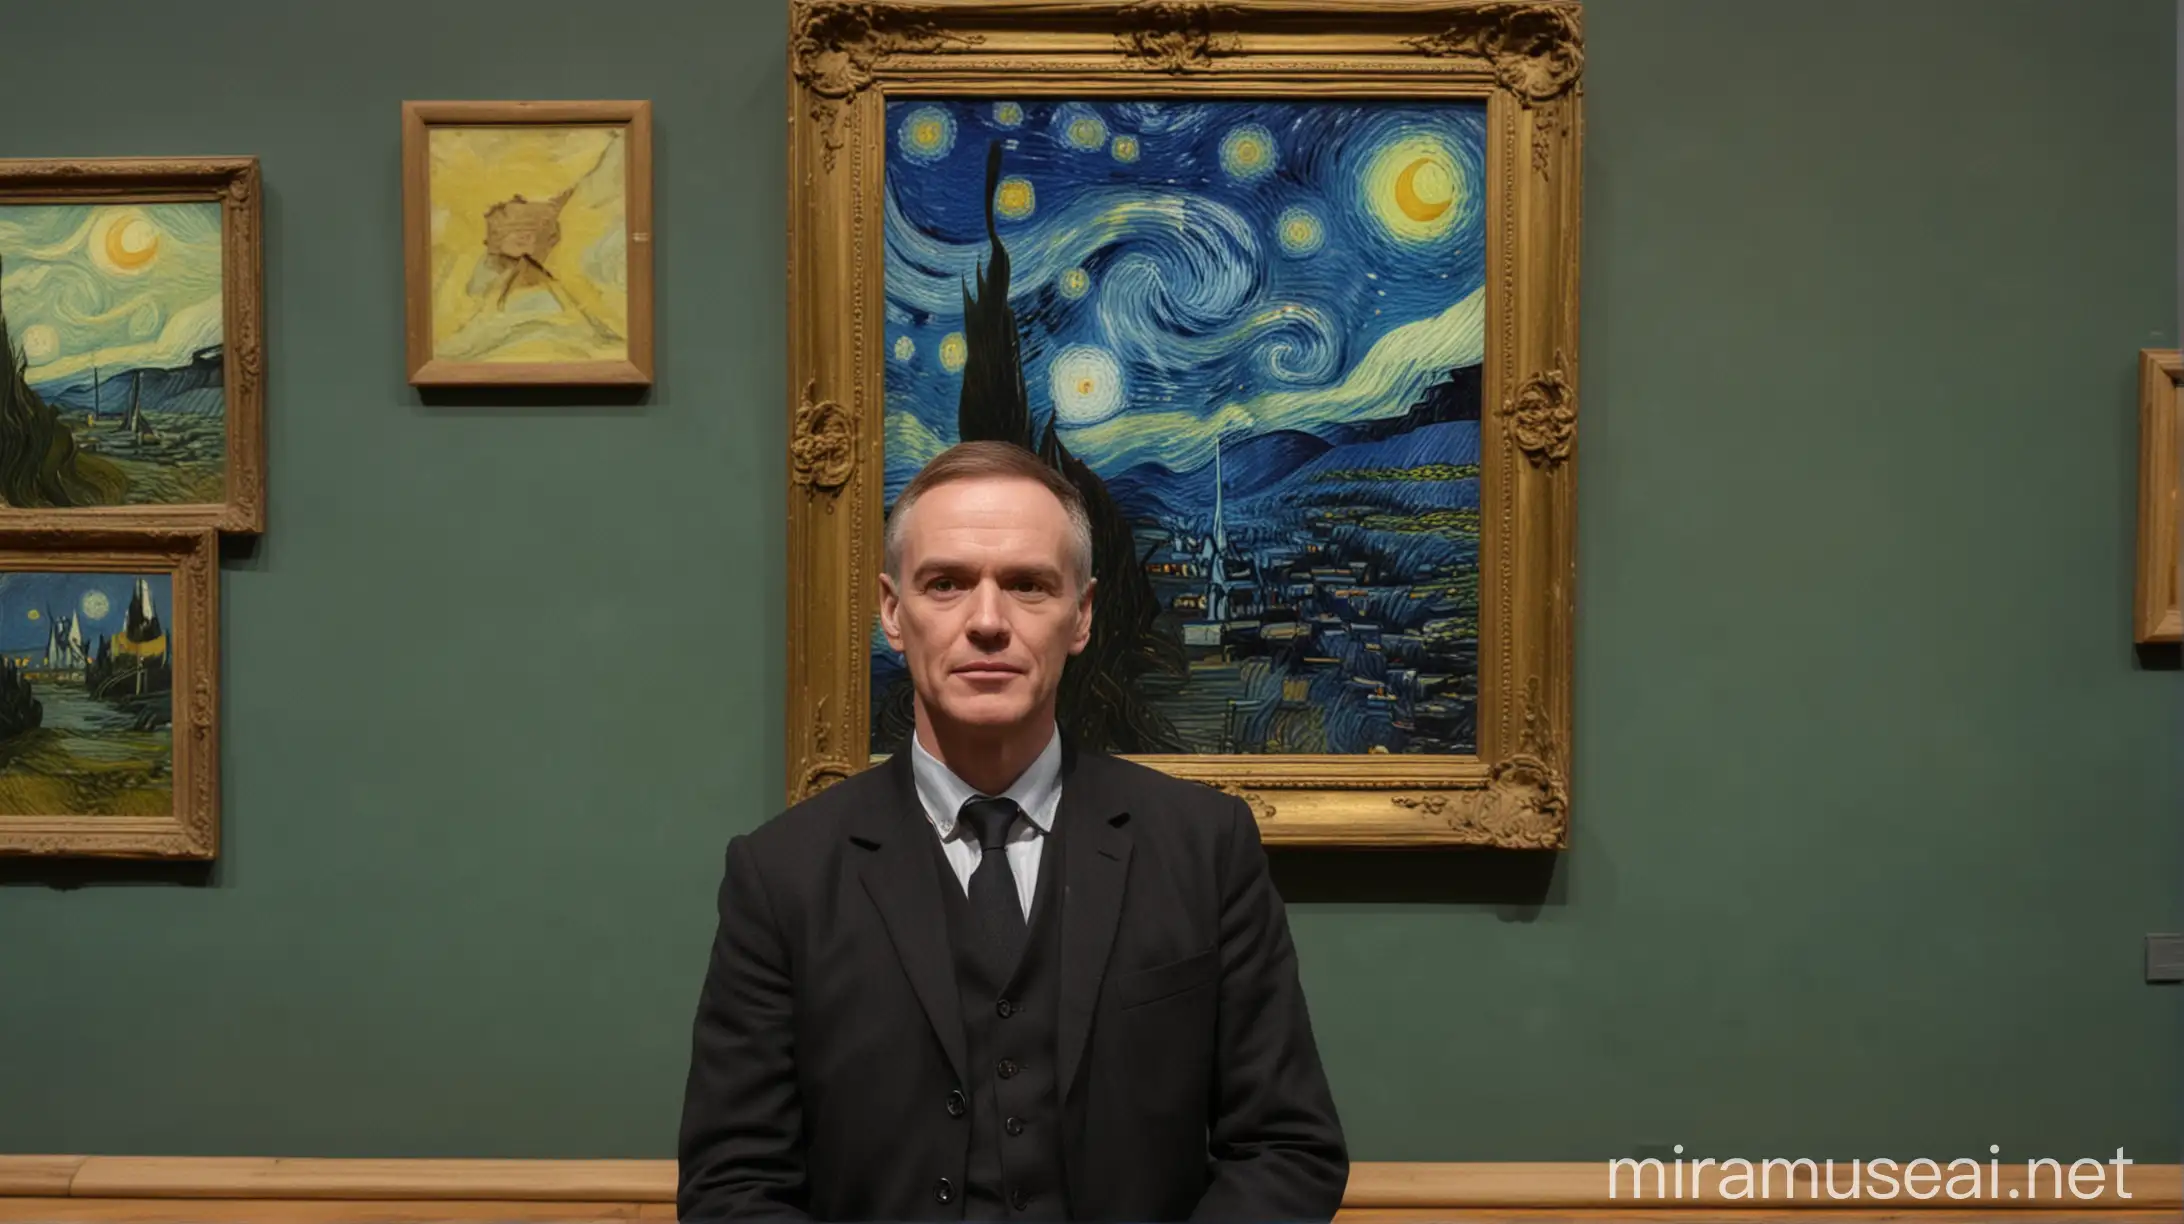 The 60 years old scientist, Dr. Alexander Grayson, moved through the Van Gogh exhibition at the British Museum with a mix of awe and curiosity.